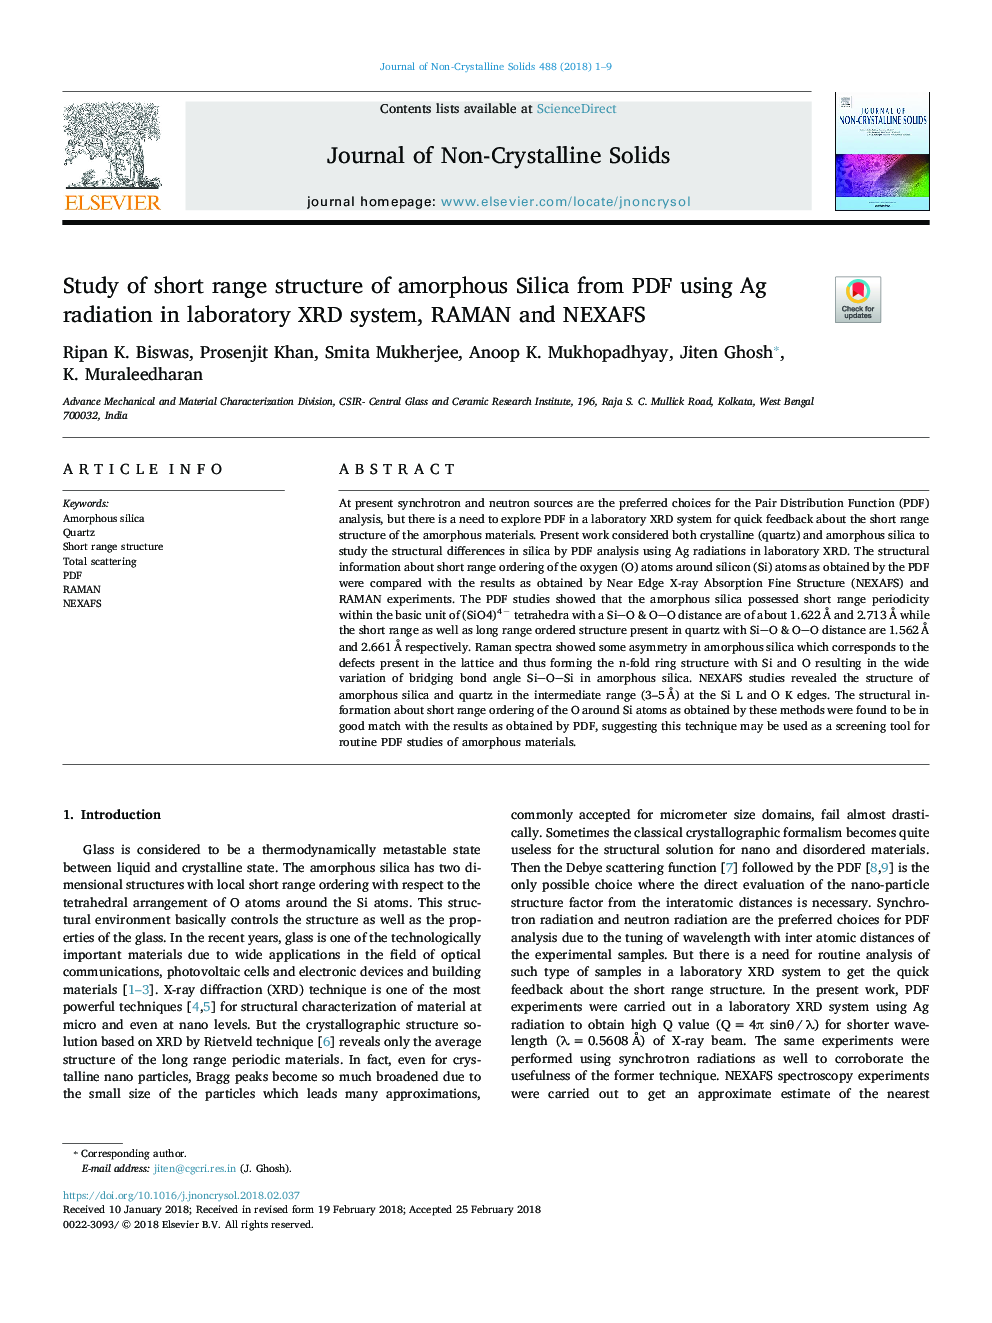 Study of short range structure of amorphous Silica from PDF using Ag radiation in laboratory XRD system, RAMAN and NEXAFS